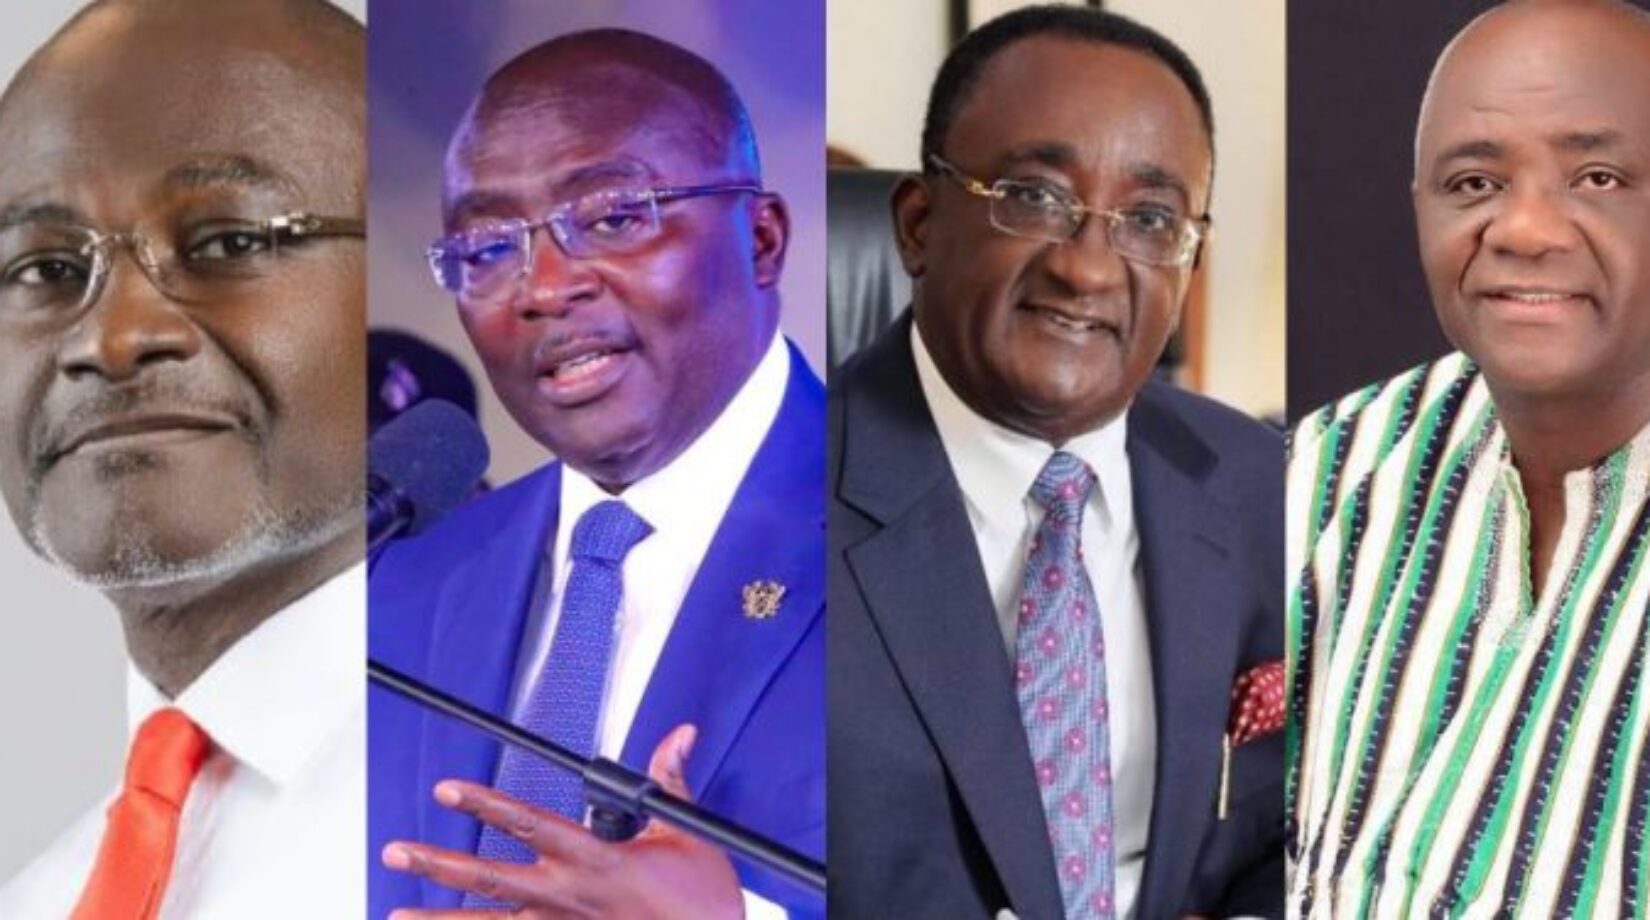 Bawumia Campaign Team has not approached Hon. Kennedy Agyapong for Running Mate Position